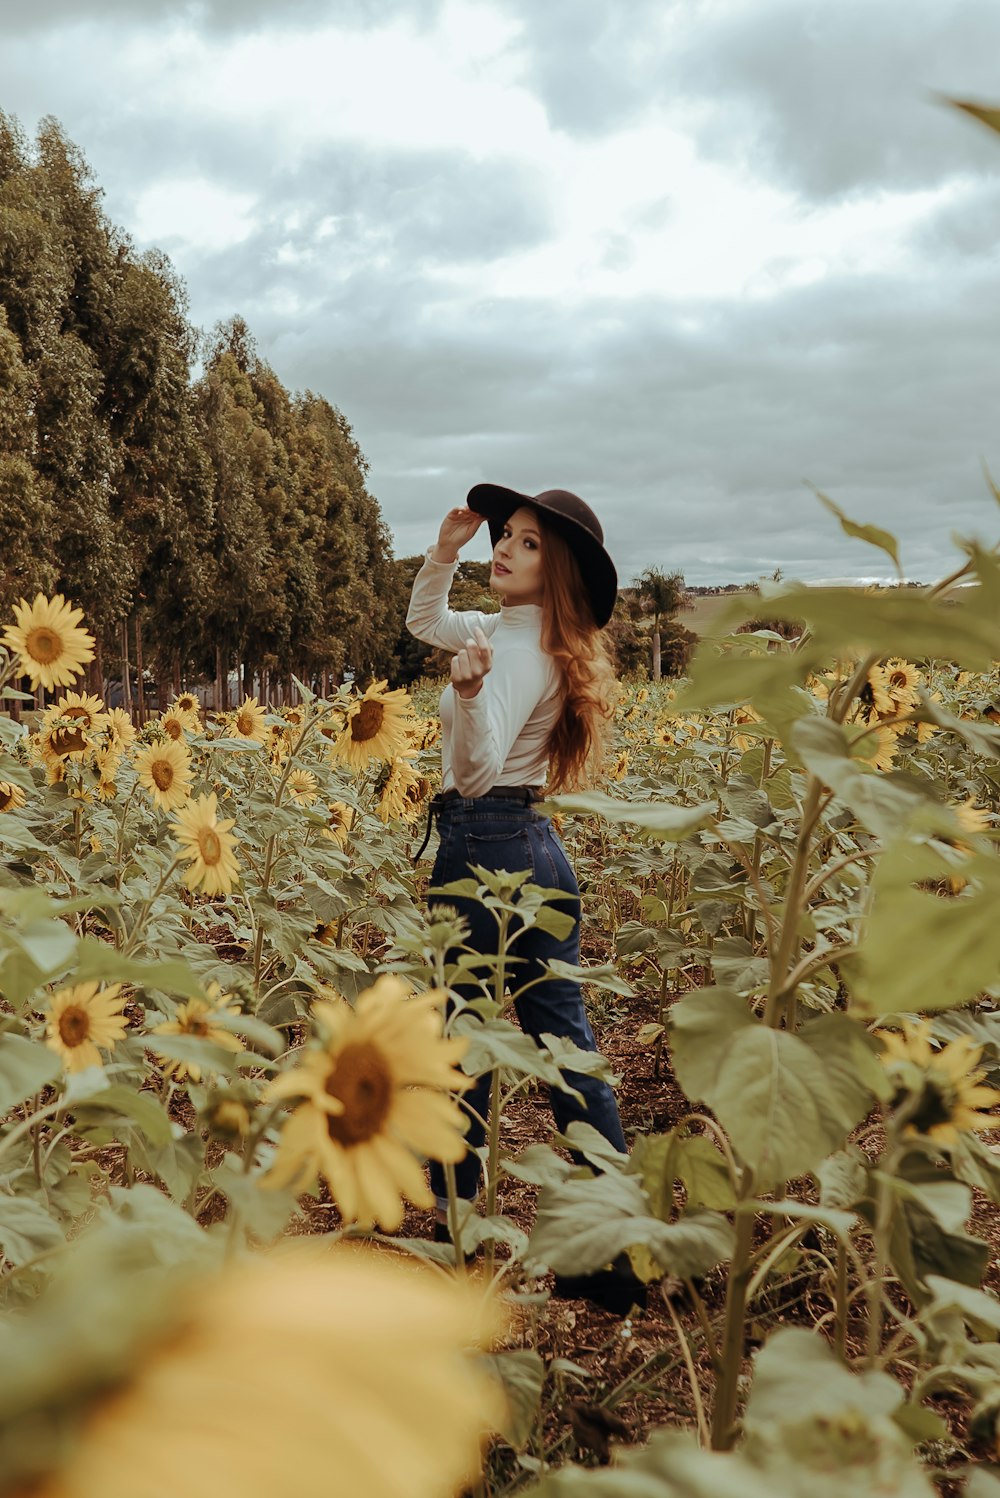 woman in white shirt and blue skirt standing on sunflower field under white clouds and blue